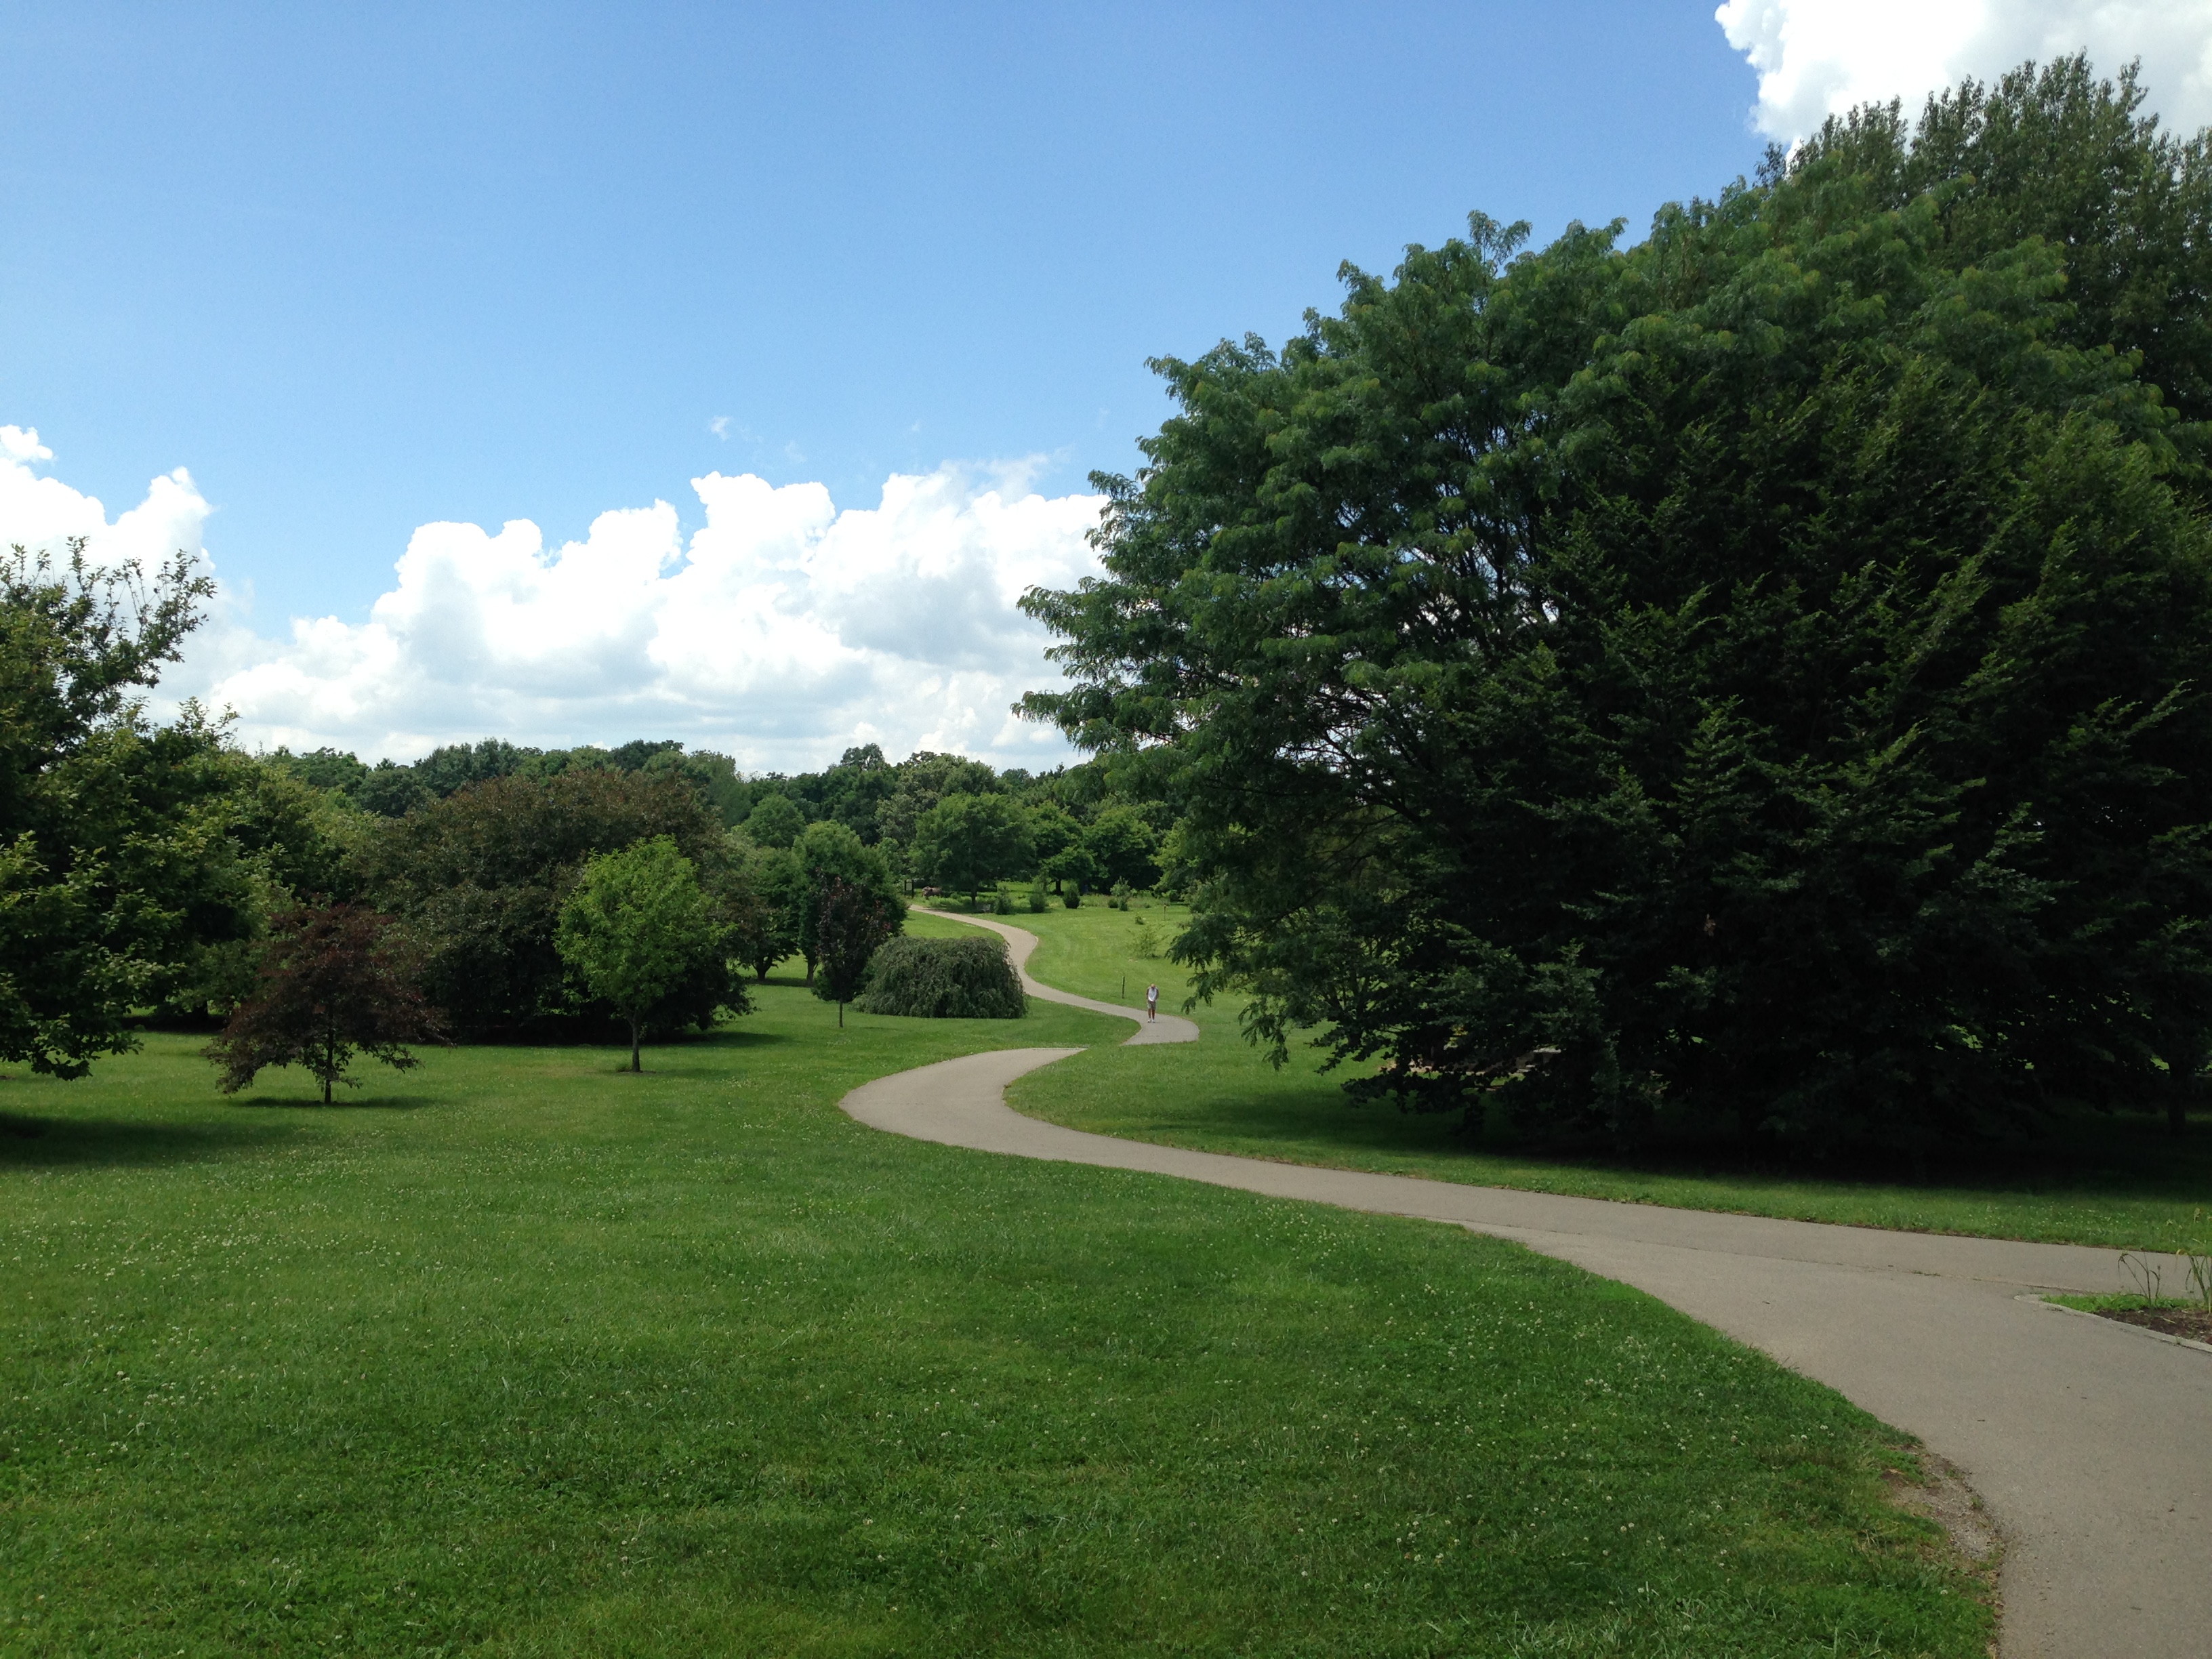 The trail meanders through the Bluegrass region of The Walk Across Kentucky at The Arboretum.